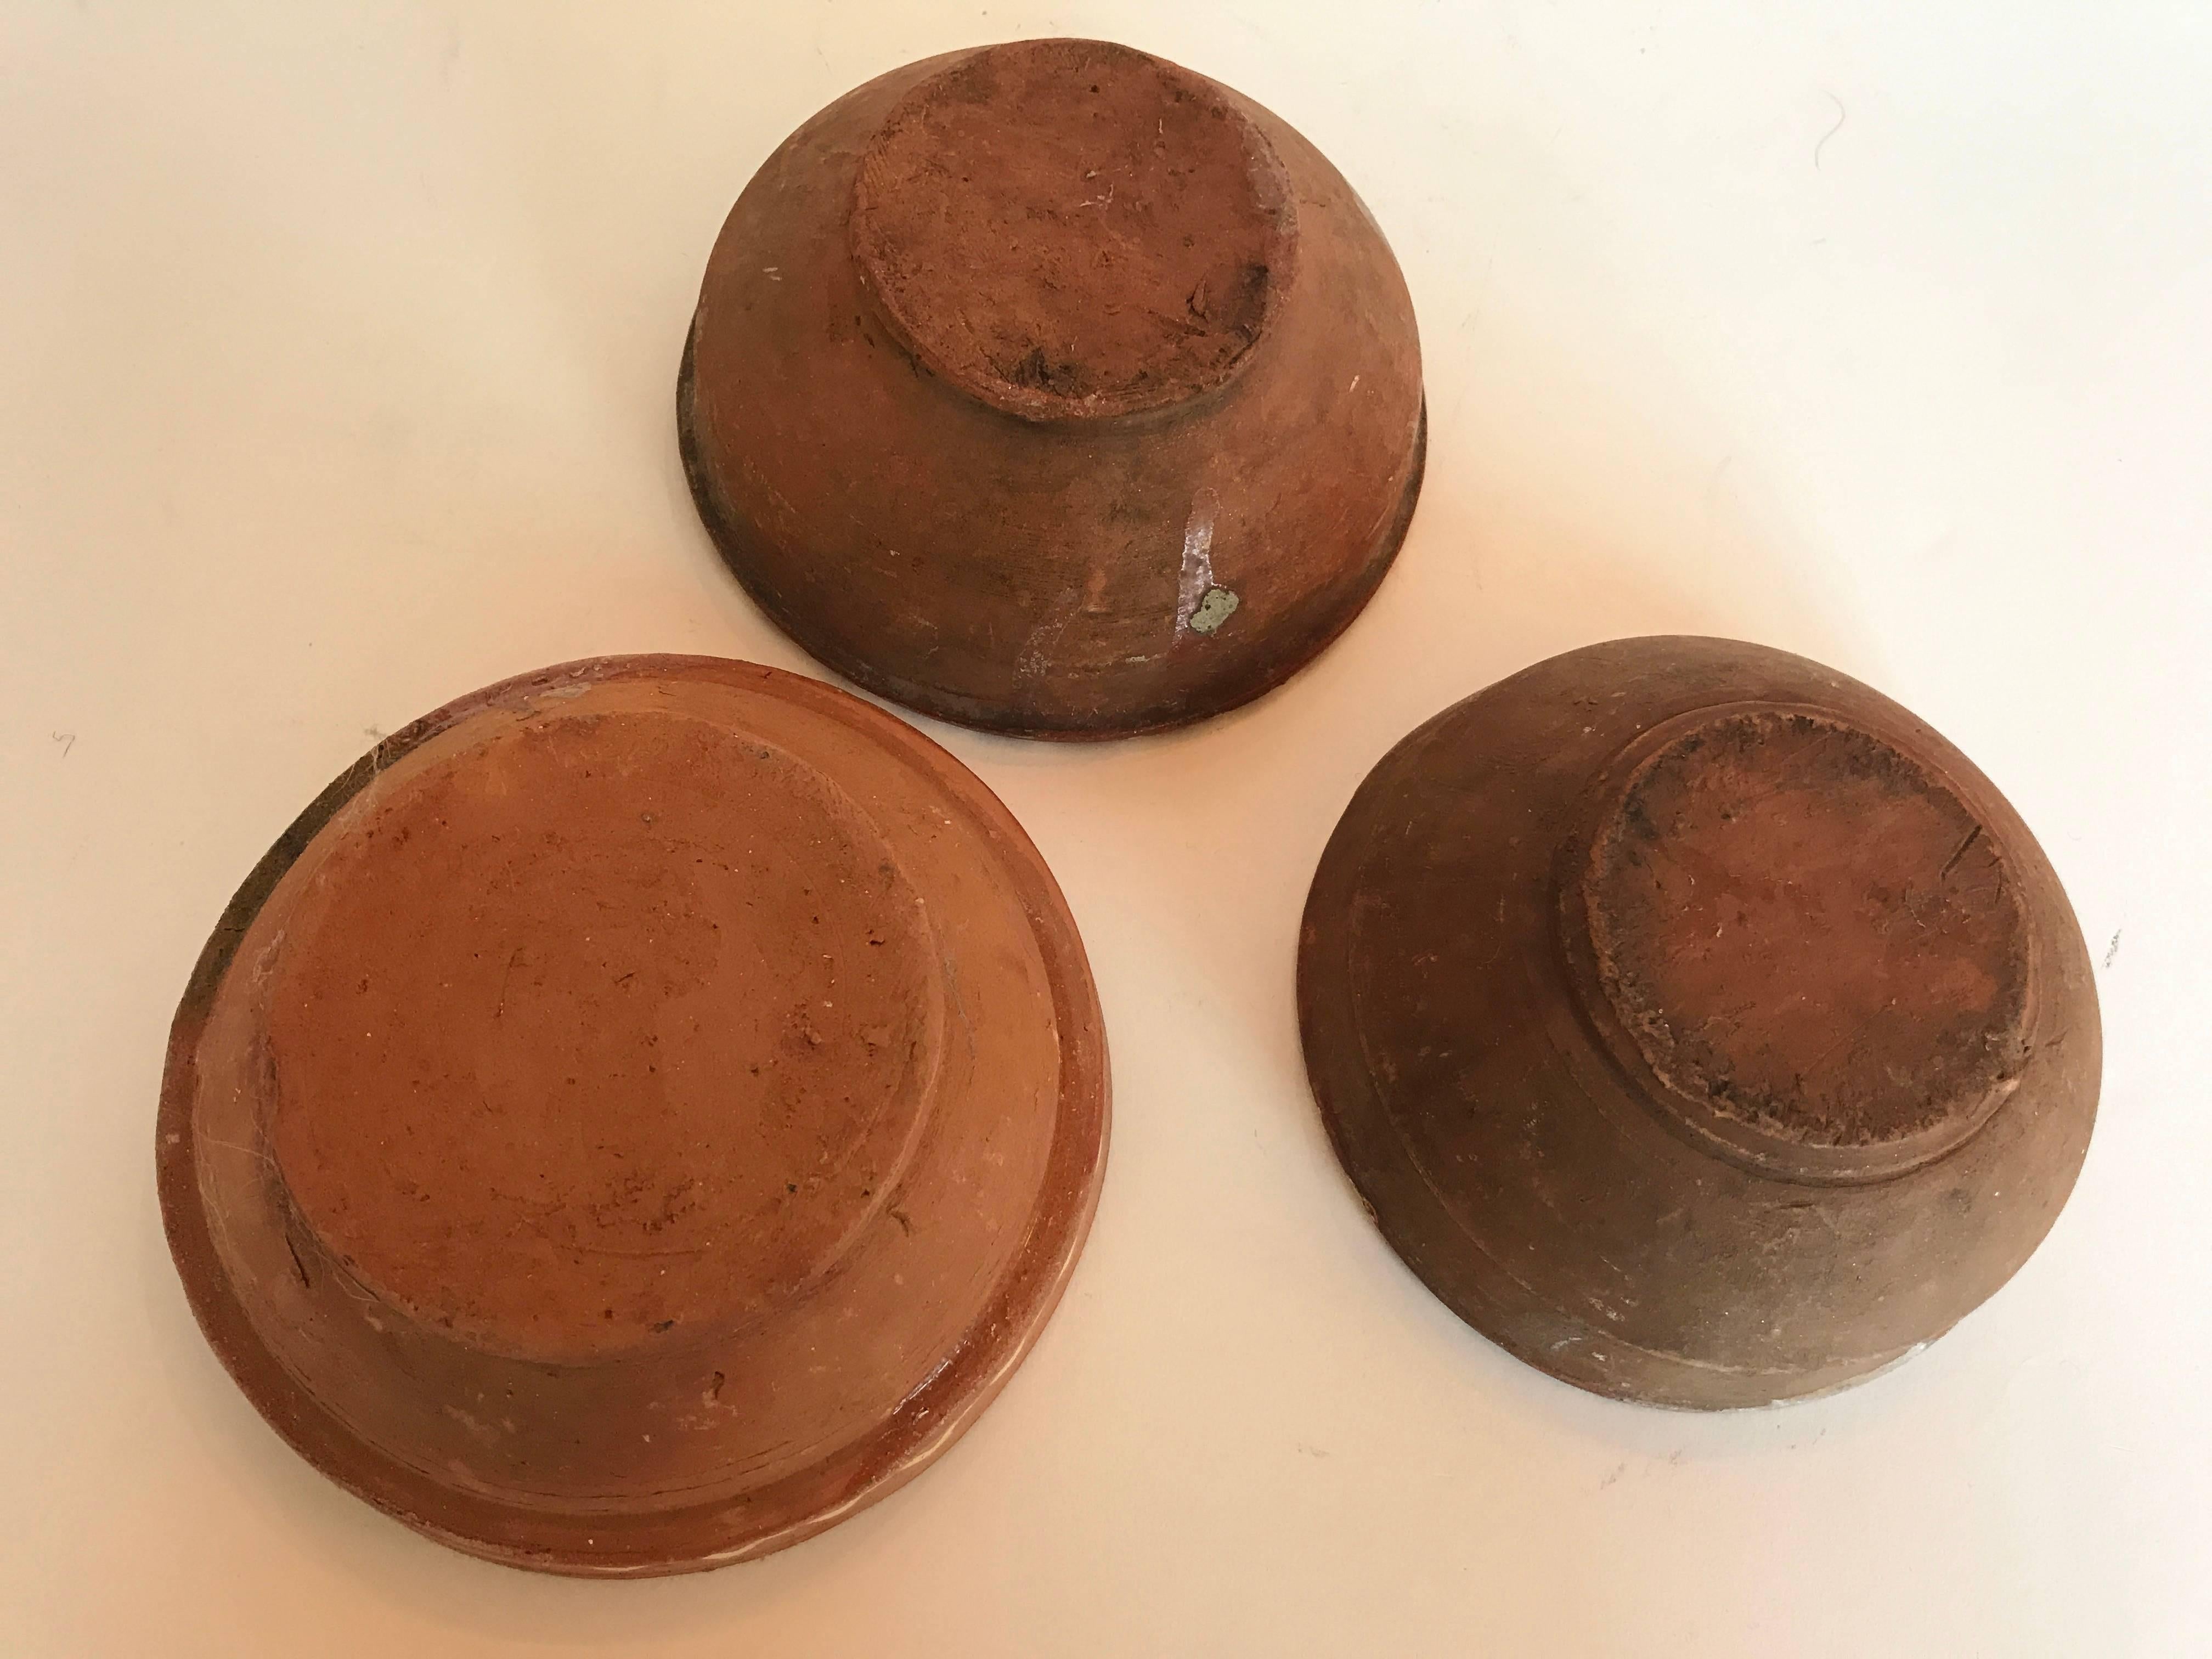 Vintage splatter painted glaze redware terra-cotta pottery bowls from Transylvania, Romania.  Each piece is hand made and slightly different in size and design.  Width, 6.5